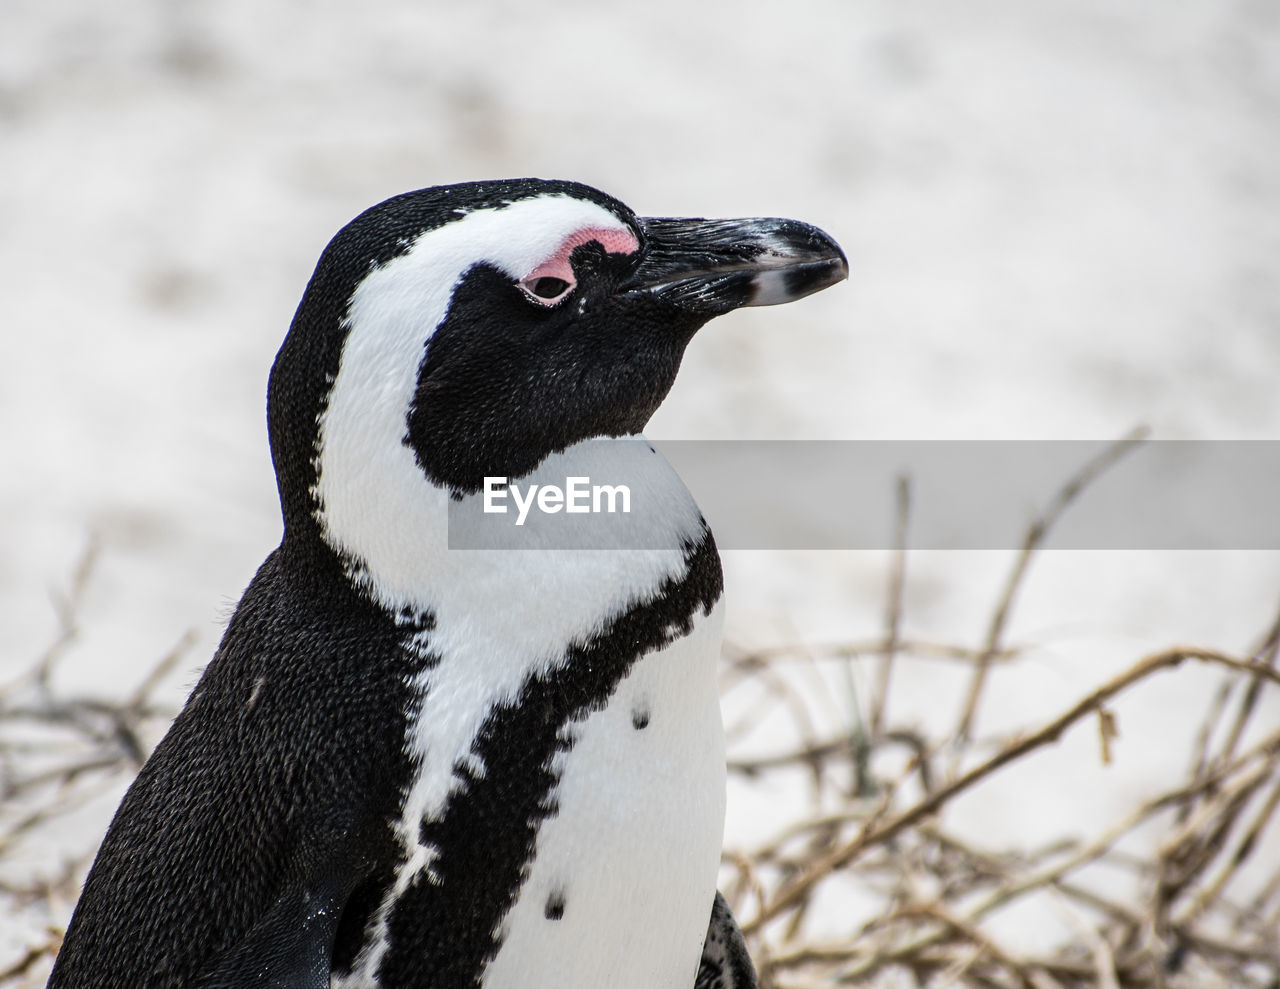 CLOSE-UP OF PENGUIN OUTDOORS